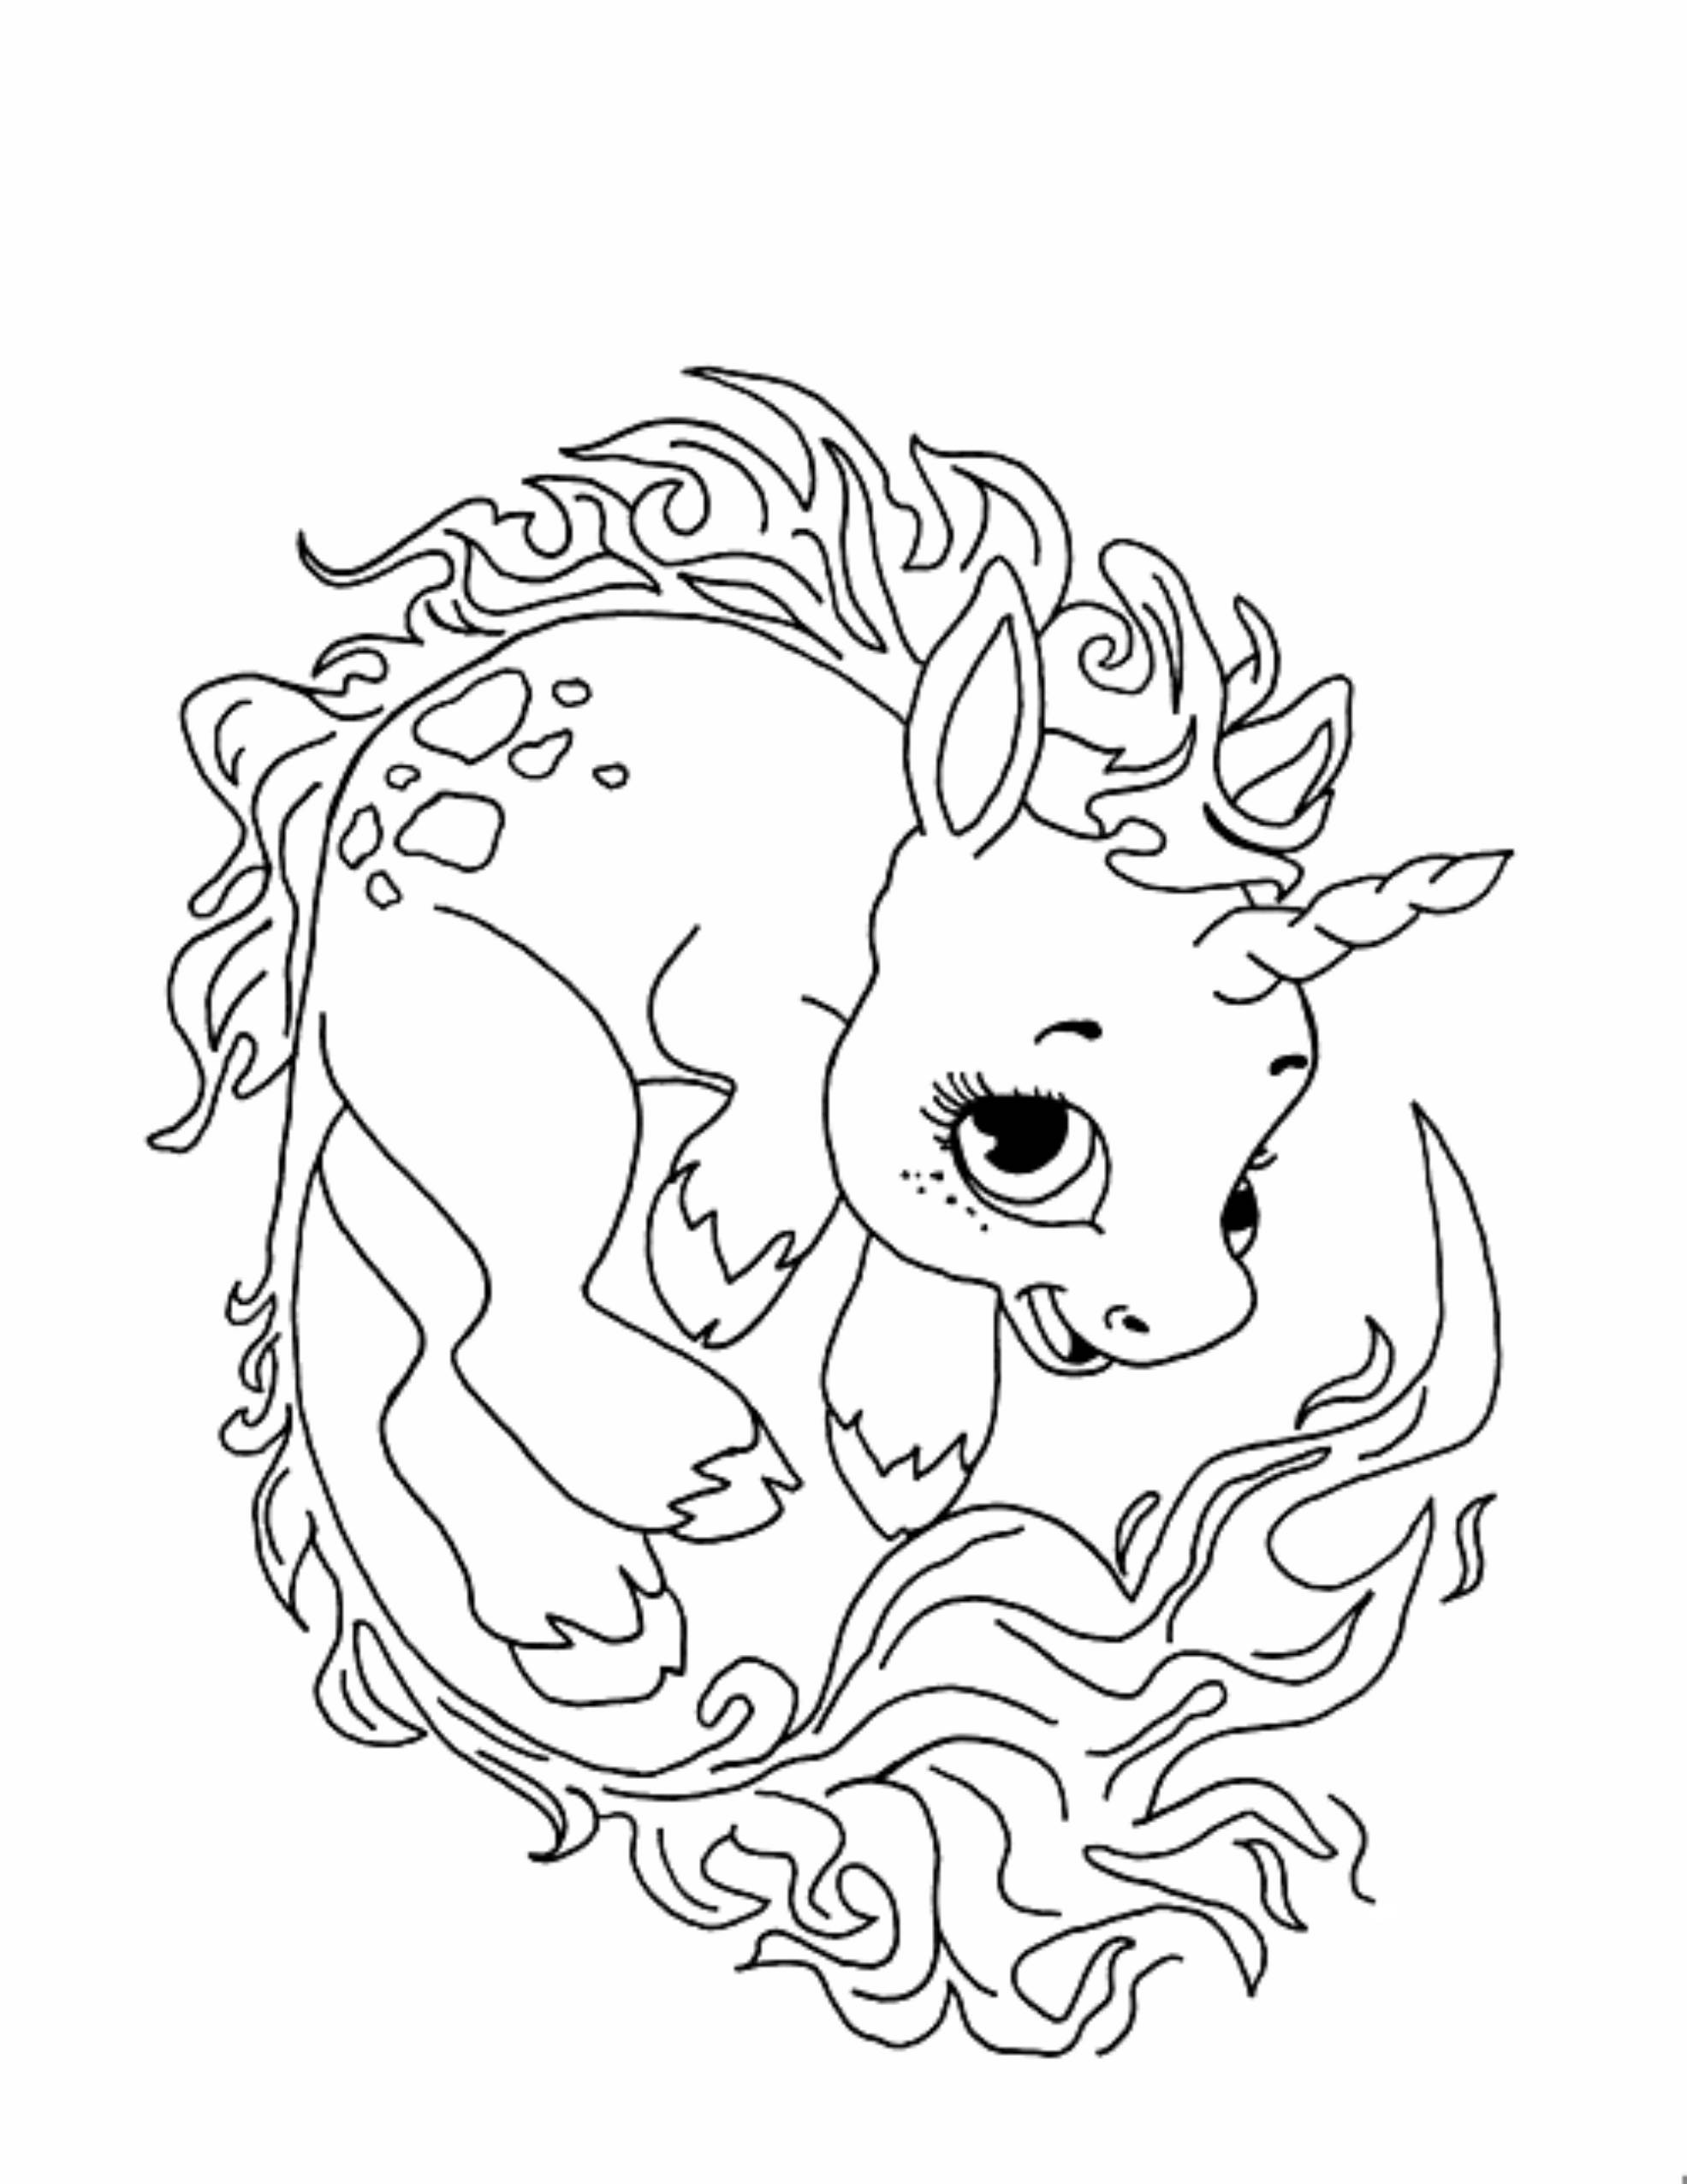 Adult Coloring Pages Unicorn
 Unicorn Coloring Pages for Adults Bestofcoloring